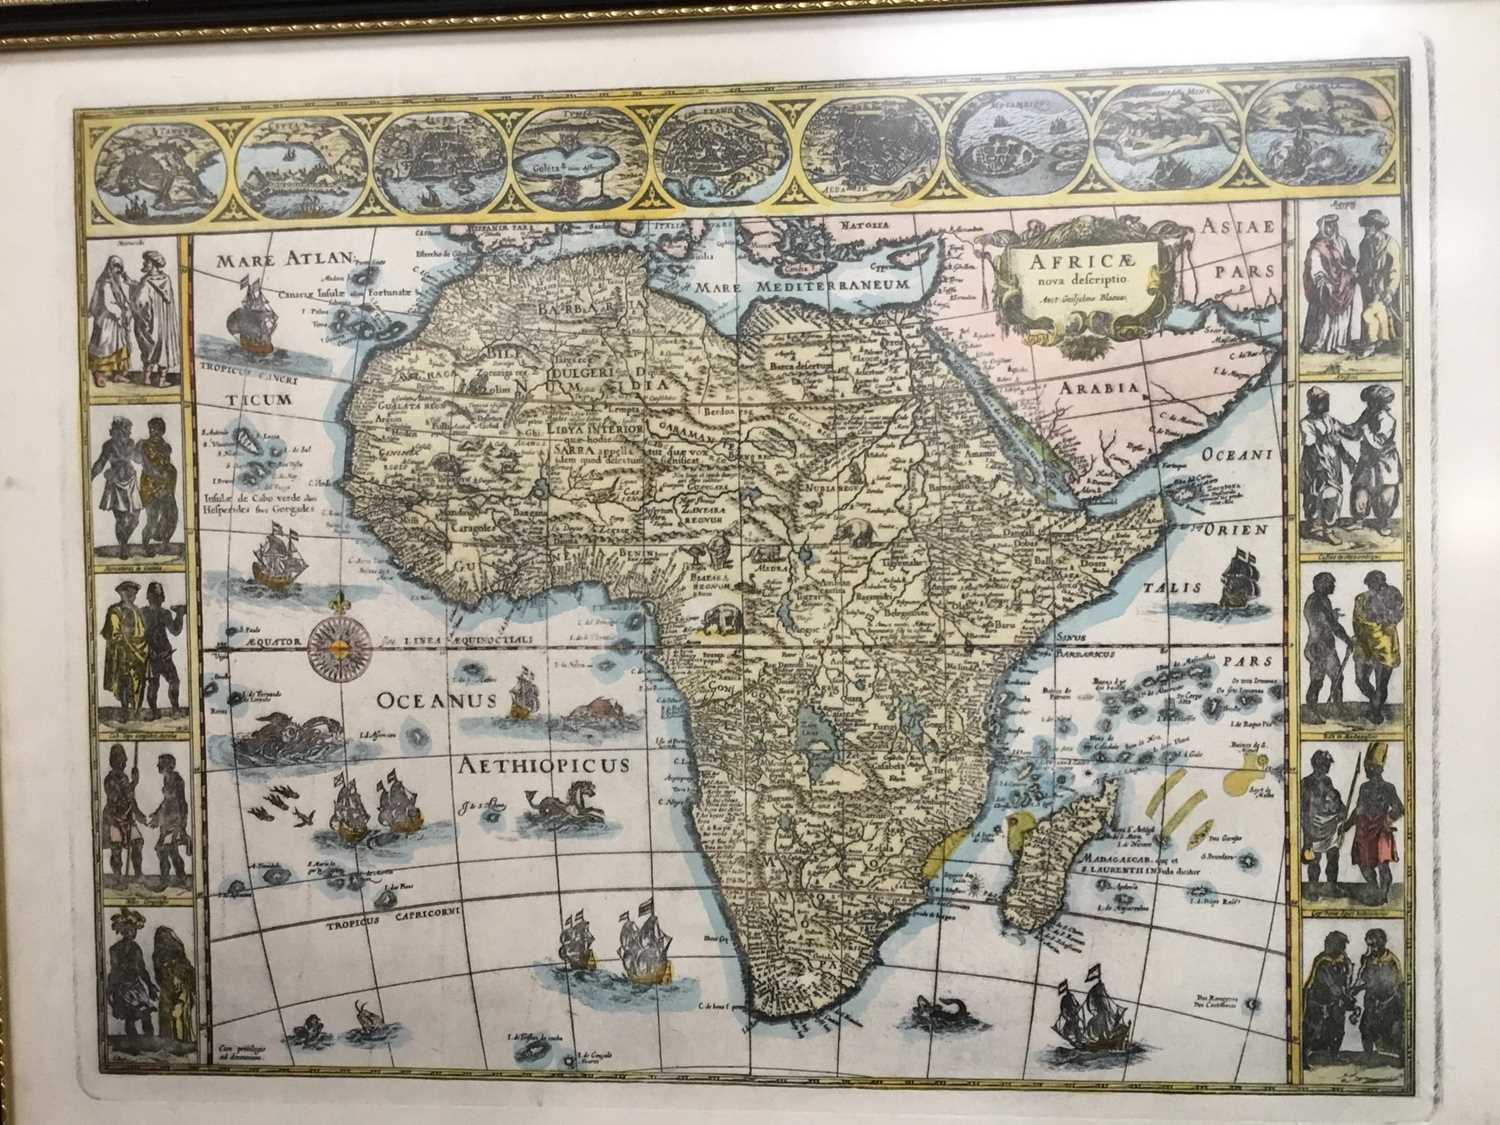 Engraved map of Africa after Blaue